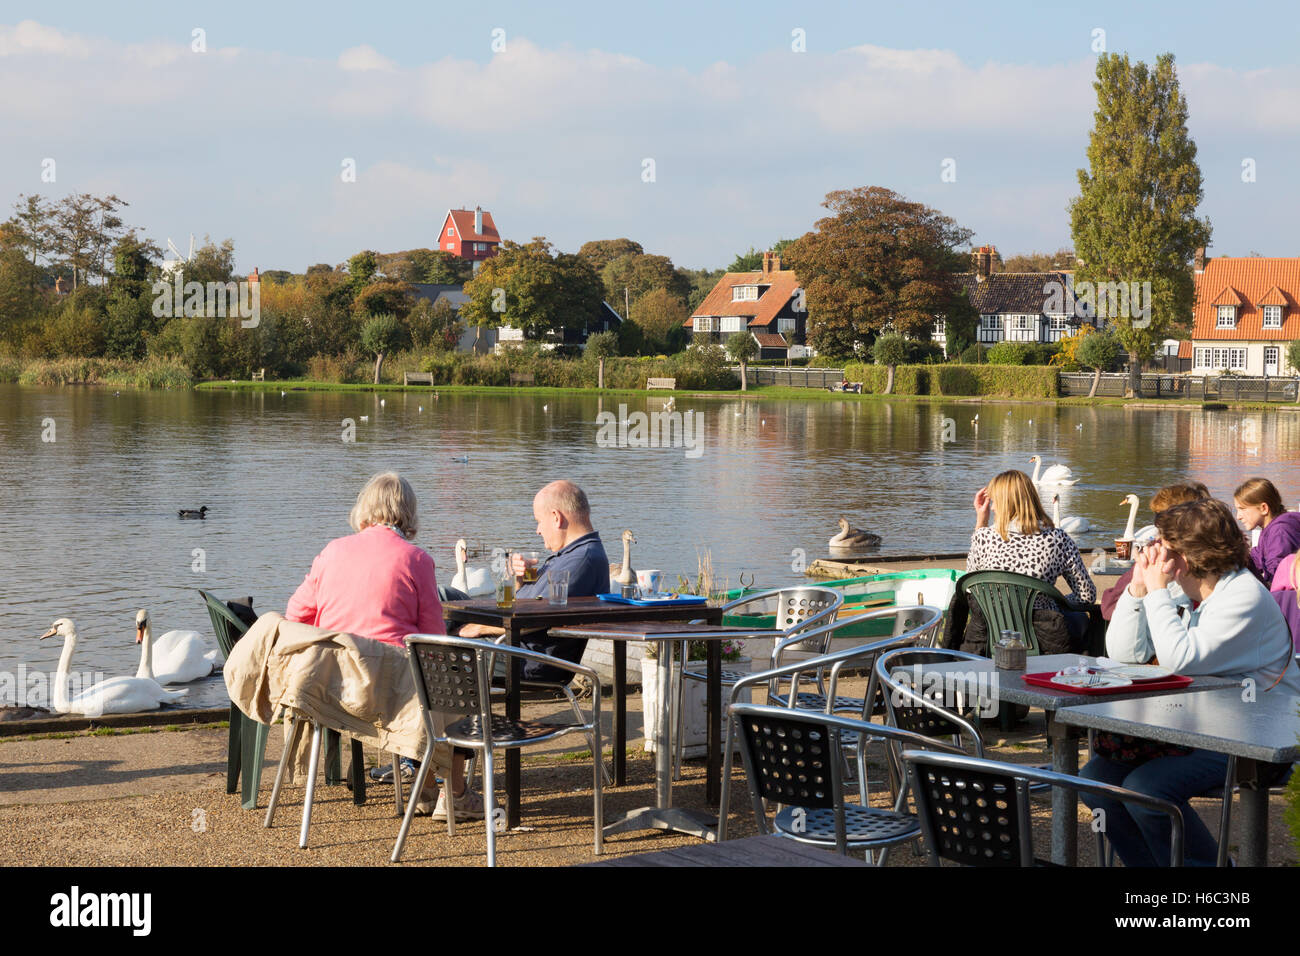 People having tea on a sunny day at Thorpeness Meare, Thorpeness village, Aldeburgh Suffolk England UK Stock Photo